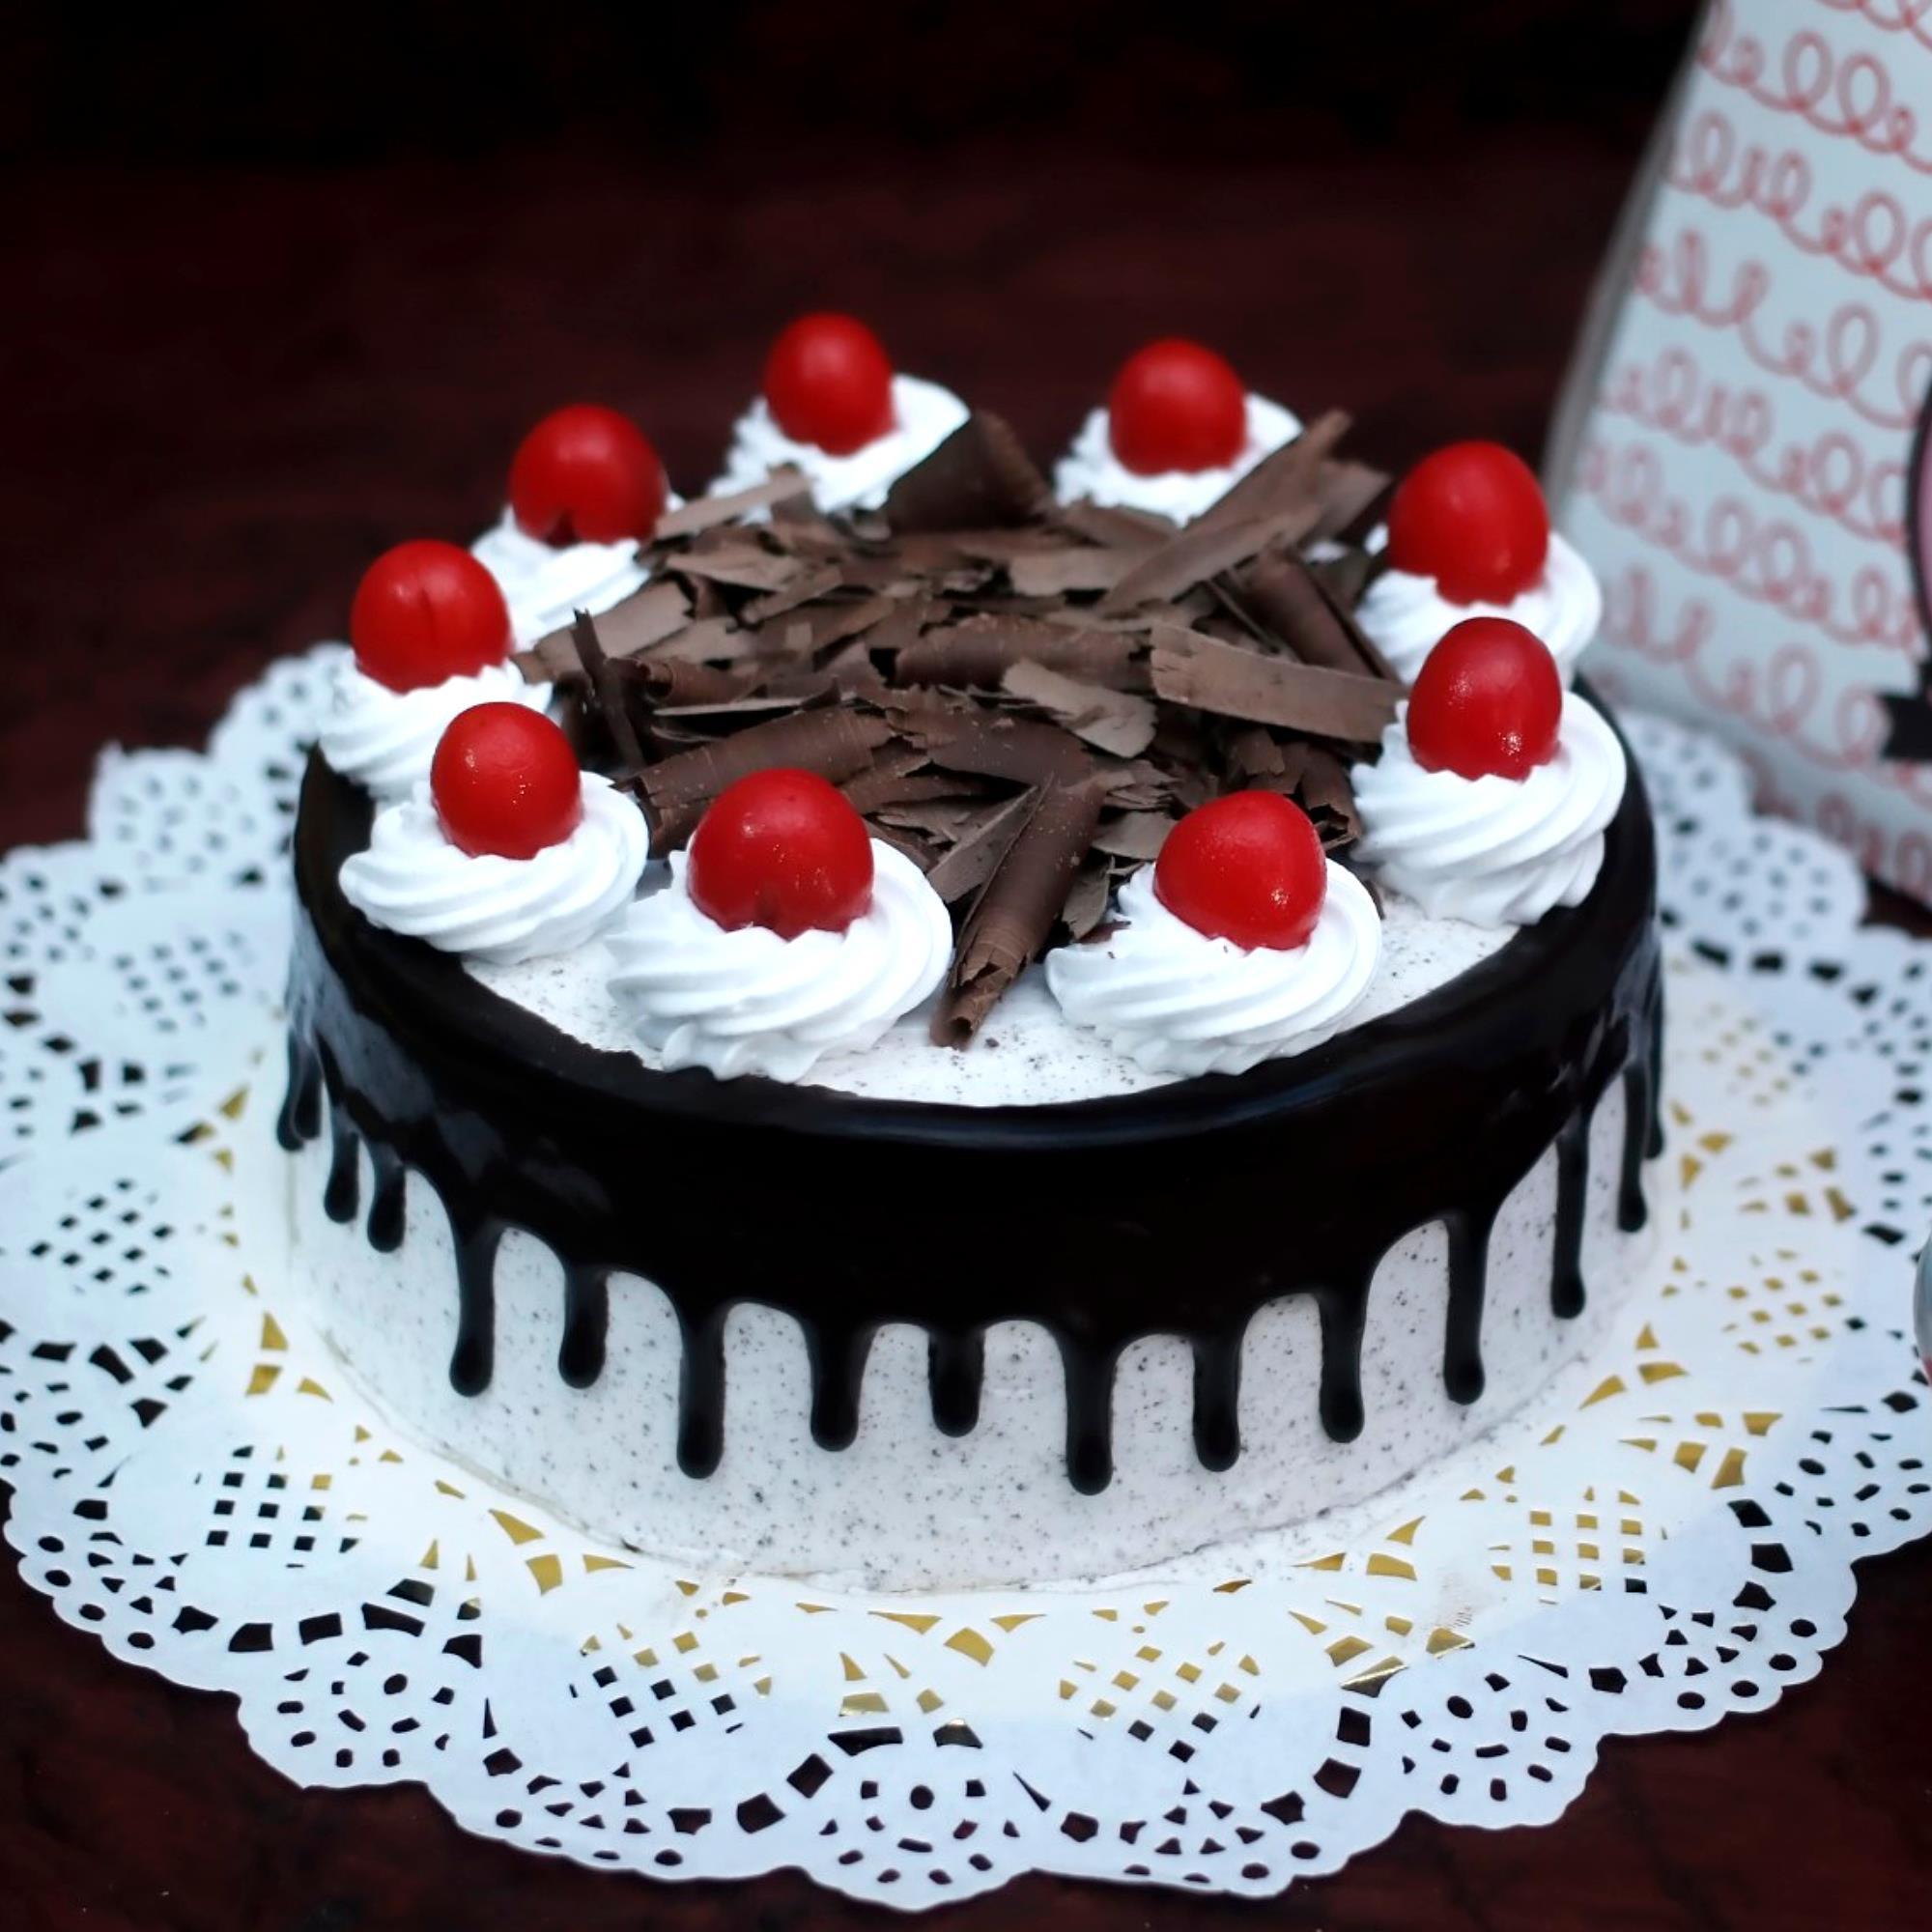 Tic Tac Toe Dad Chocolate Cake, 24x7 Home delivery of Cake in Gurgaon  Village, Gurgaon